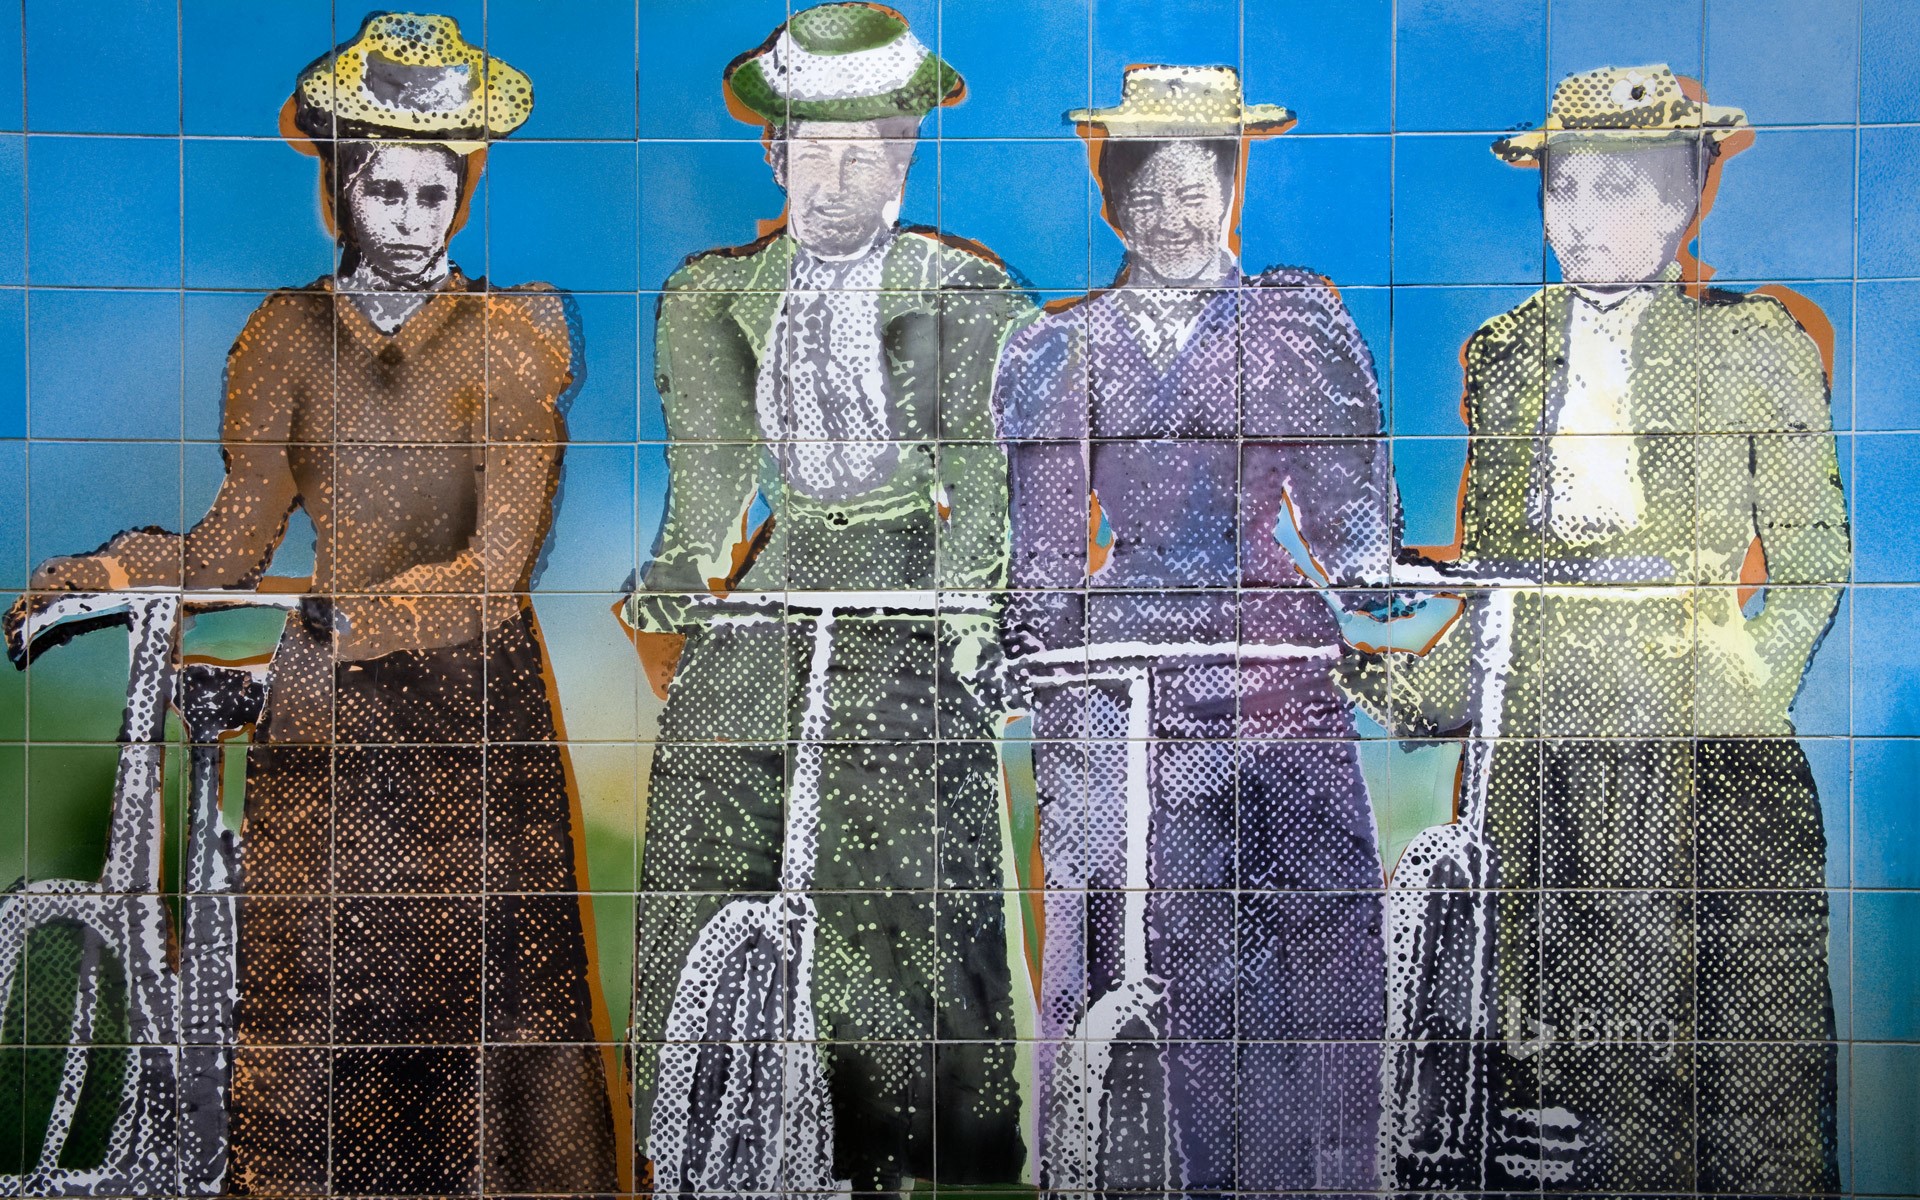 Women's suffrage tile mural outside the Auckland Art Gallery, New Zealand